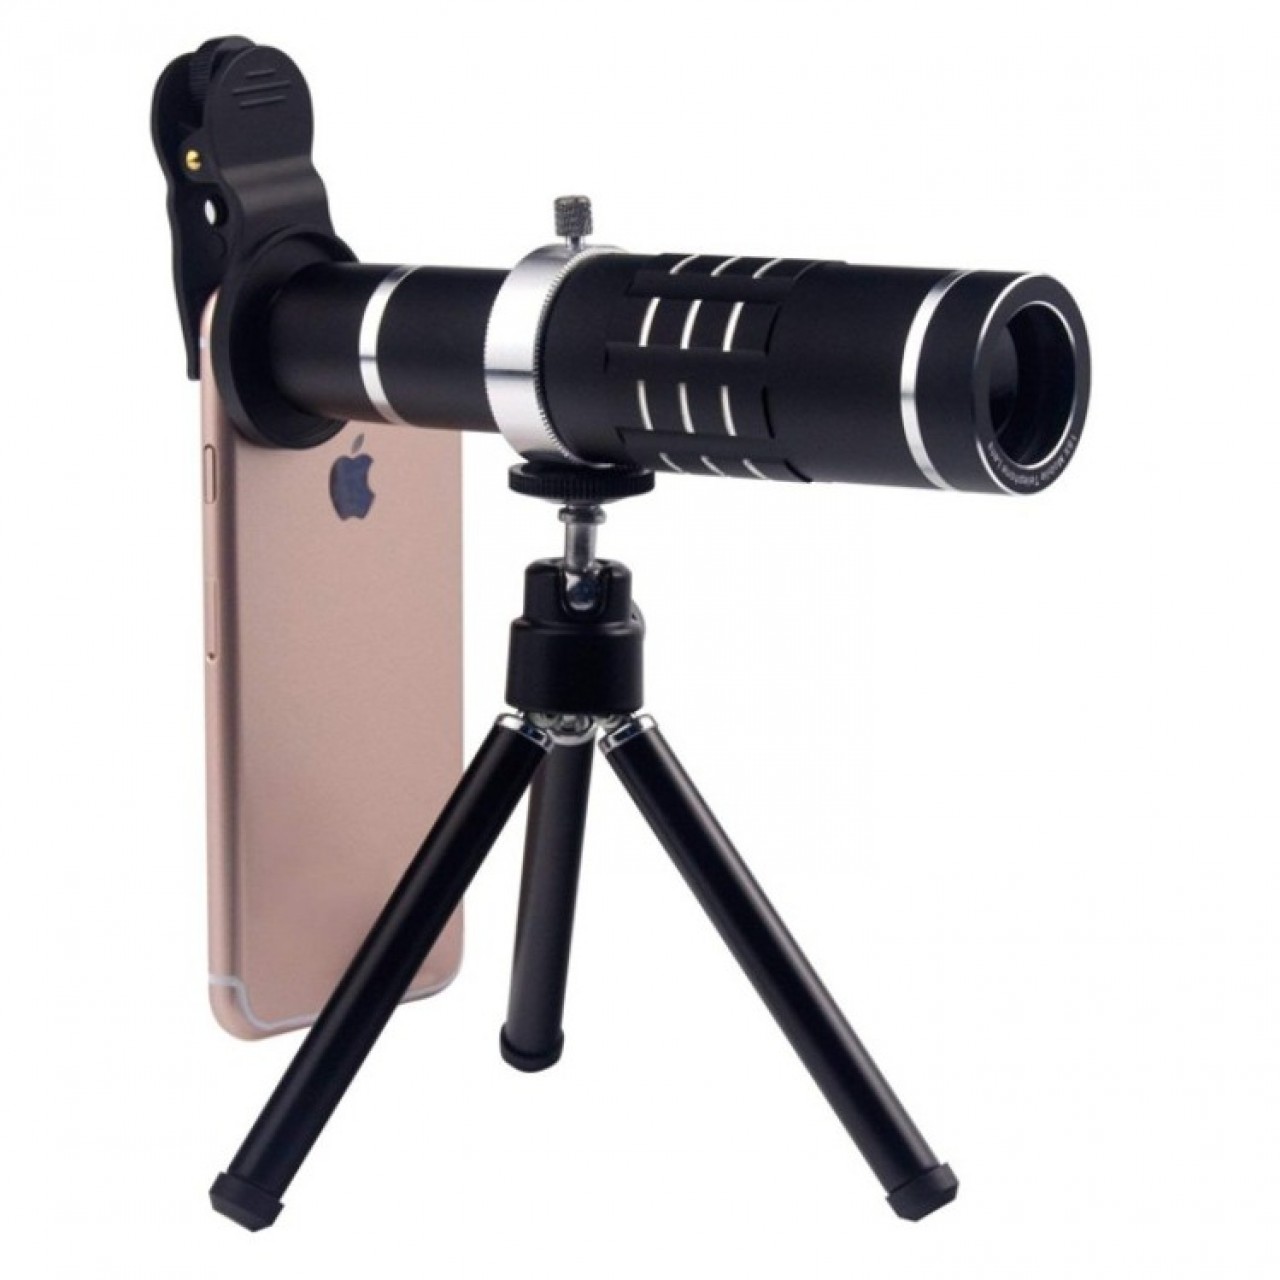 Universal 18X Zoom Telephoto Lens With Tripod Telescope For Mobile Phone Camera Lens - Black